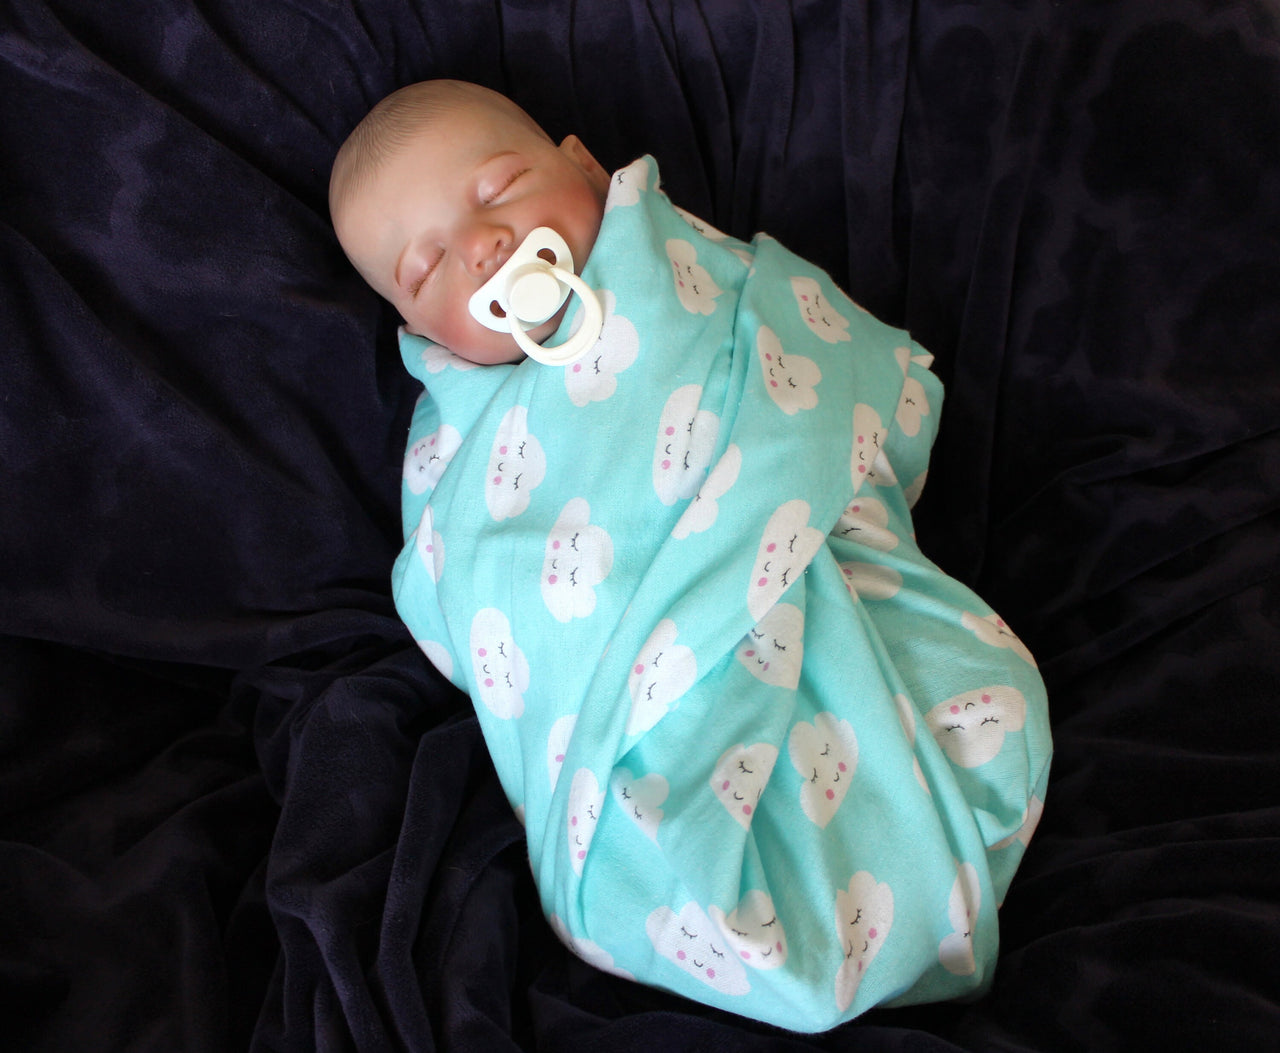 Whales yellow and blue outfit, Lifelike Reborn Baby Doll, Therapy doll, 20 inches 2 to 8 Pounds Weighted, Newborn Baby Boy, Soft Heavy Baby Dolls For Children Child Friendly Gifts For Girls, dementia therapy dolls